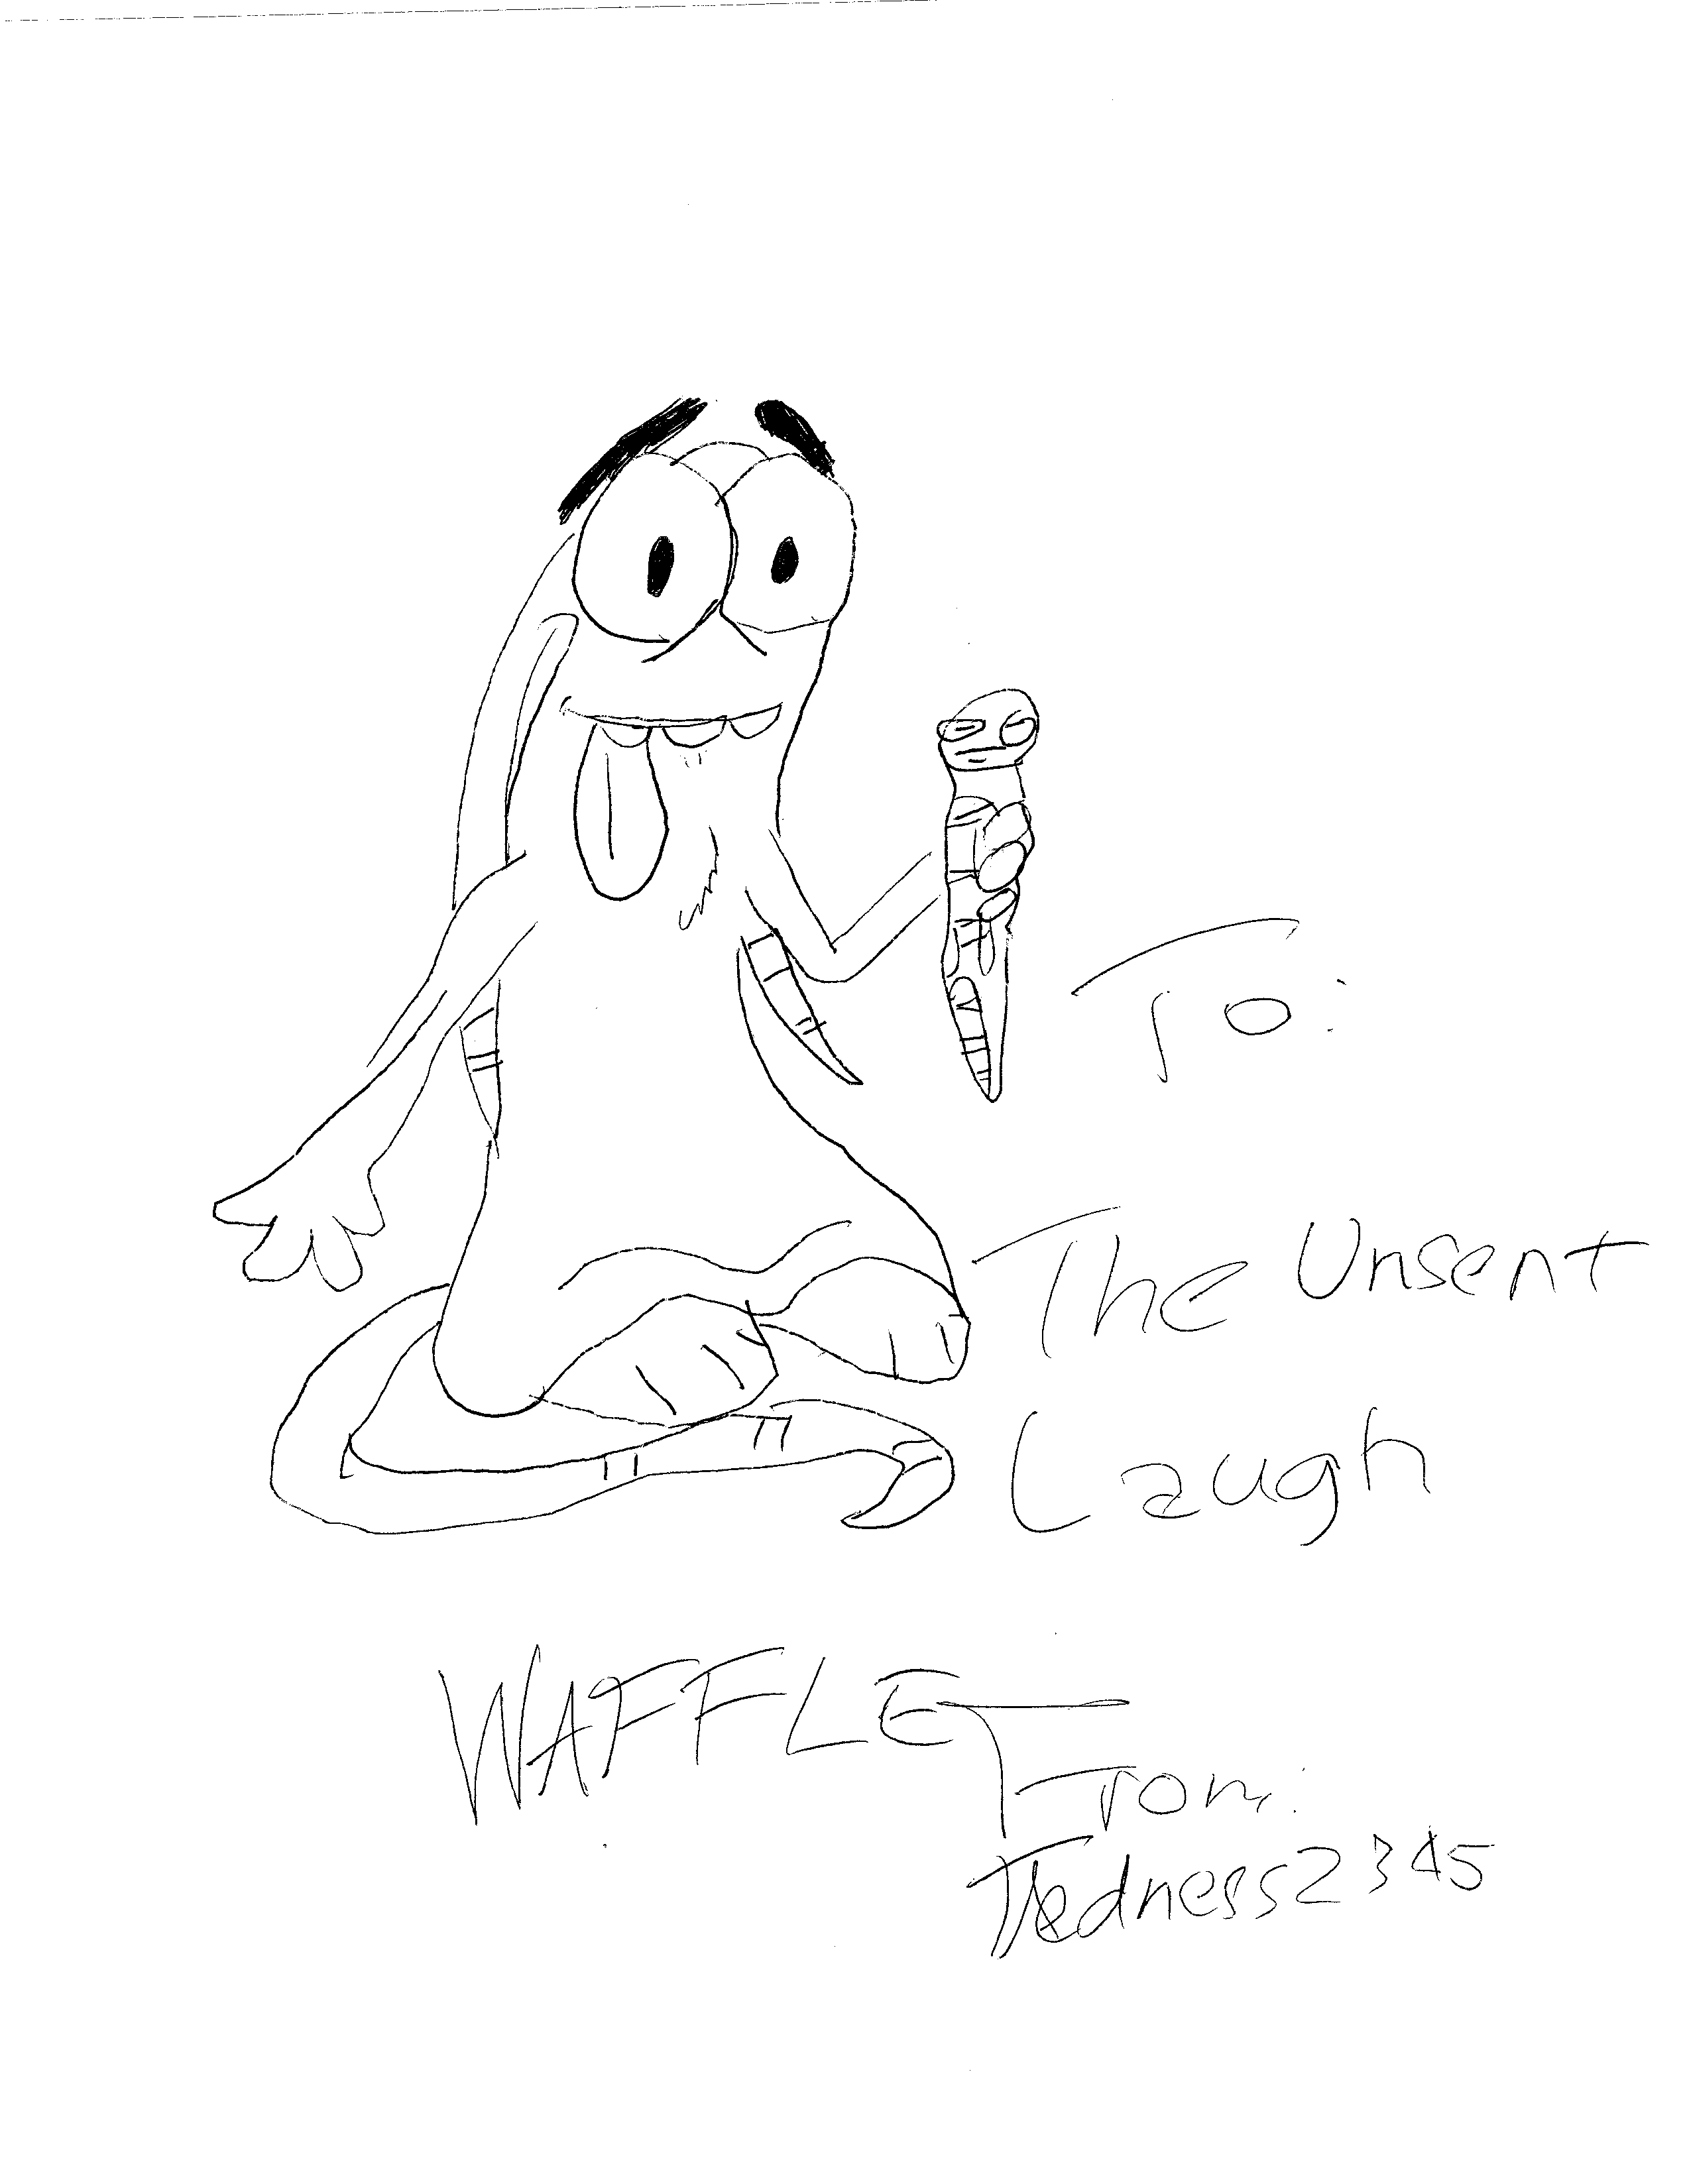 Waffle! For: The unsent laugh by tedness2345